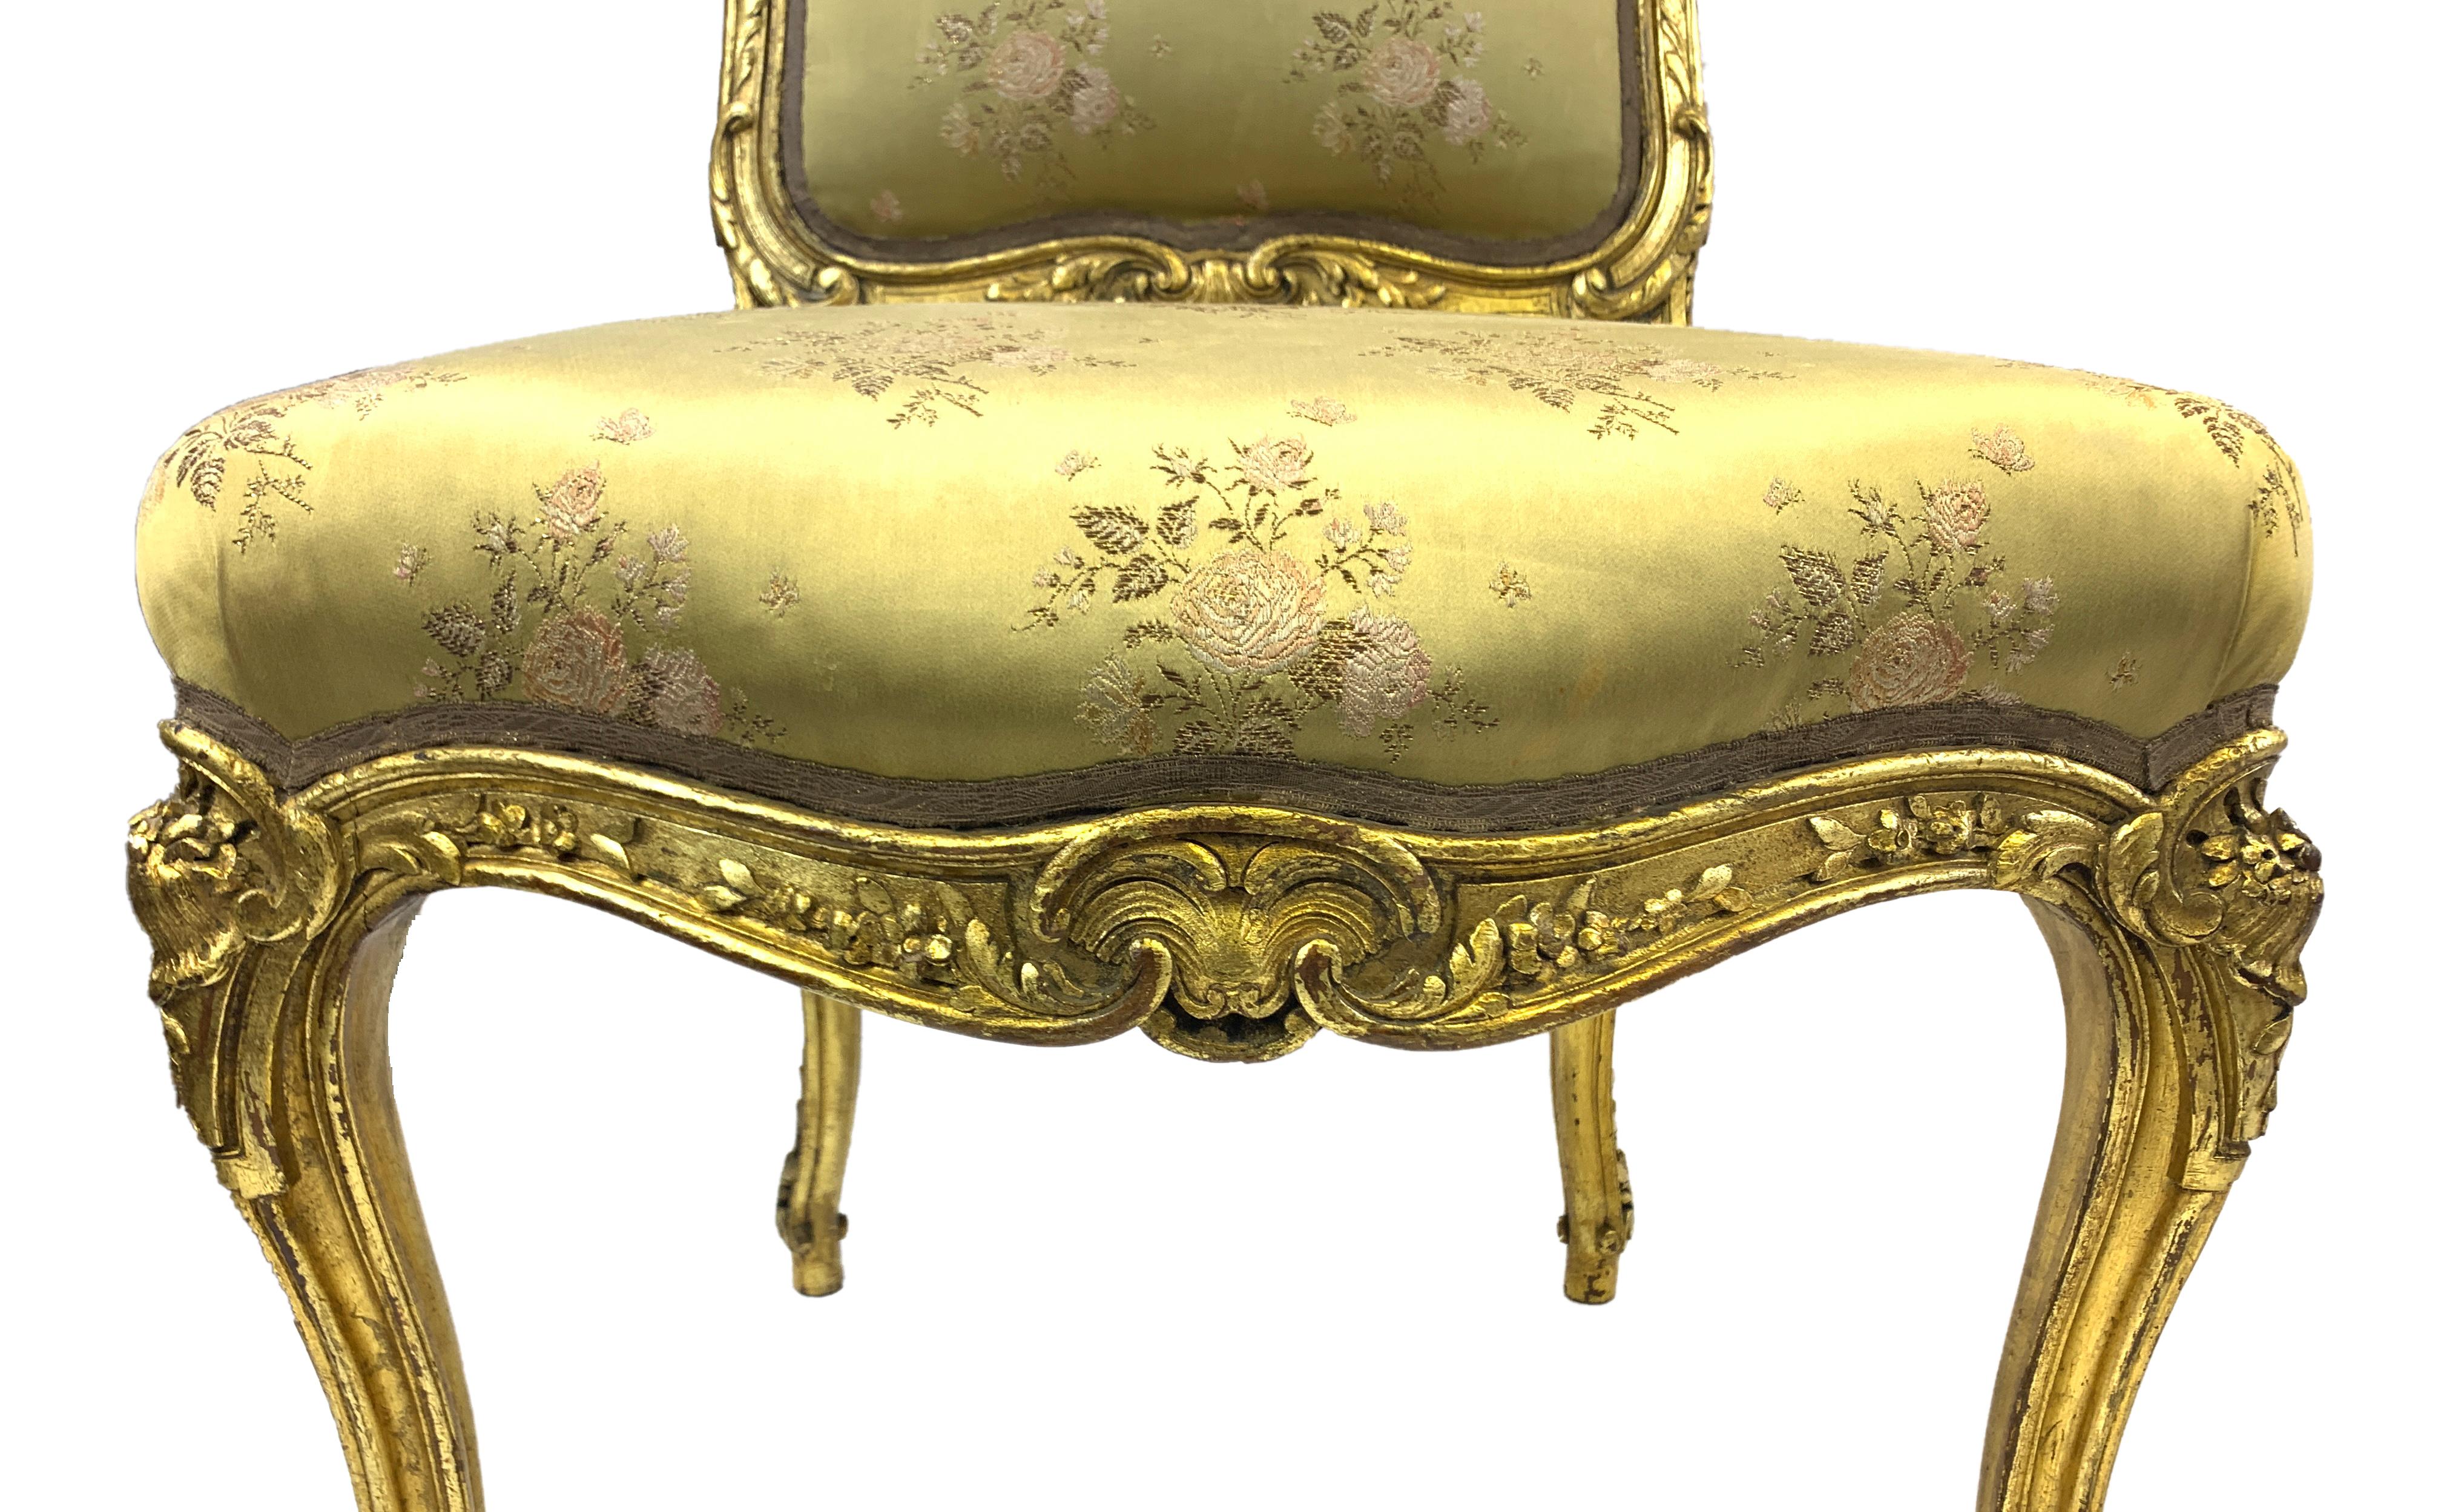 Each with a padded back and seat, upholstered in greenish fabric with flower pattern, the shell-carved front seat rail raised on leaf-carved cabriole legs.
 